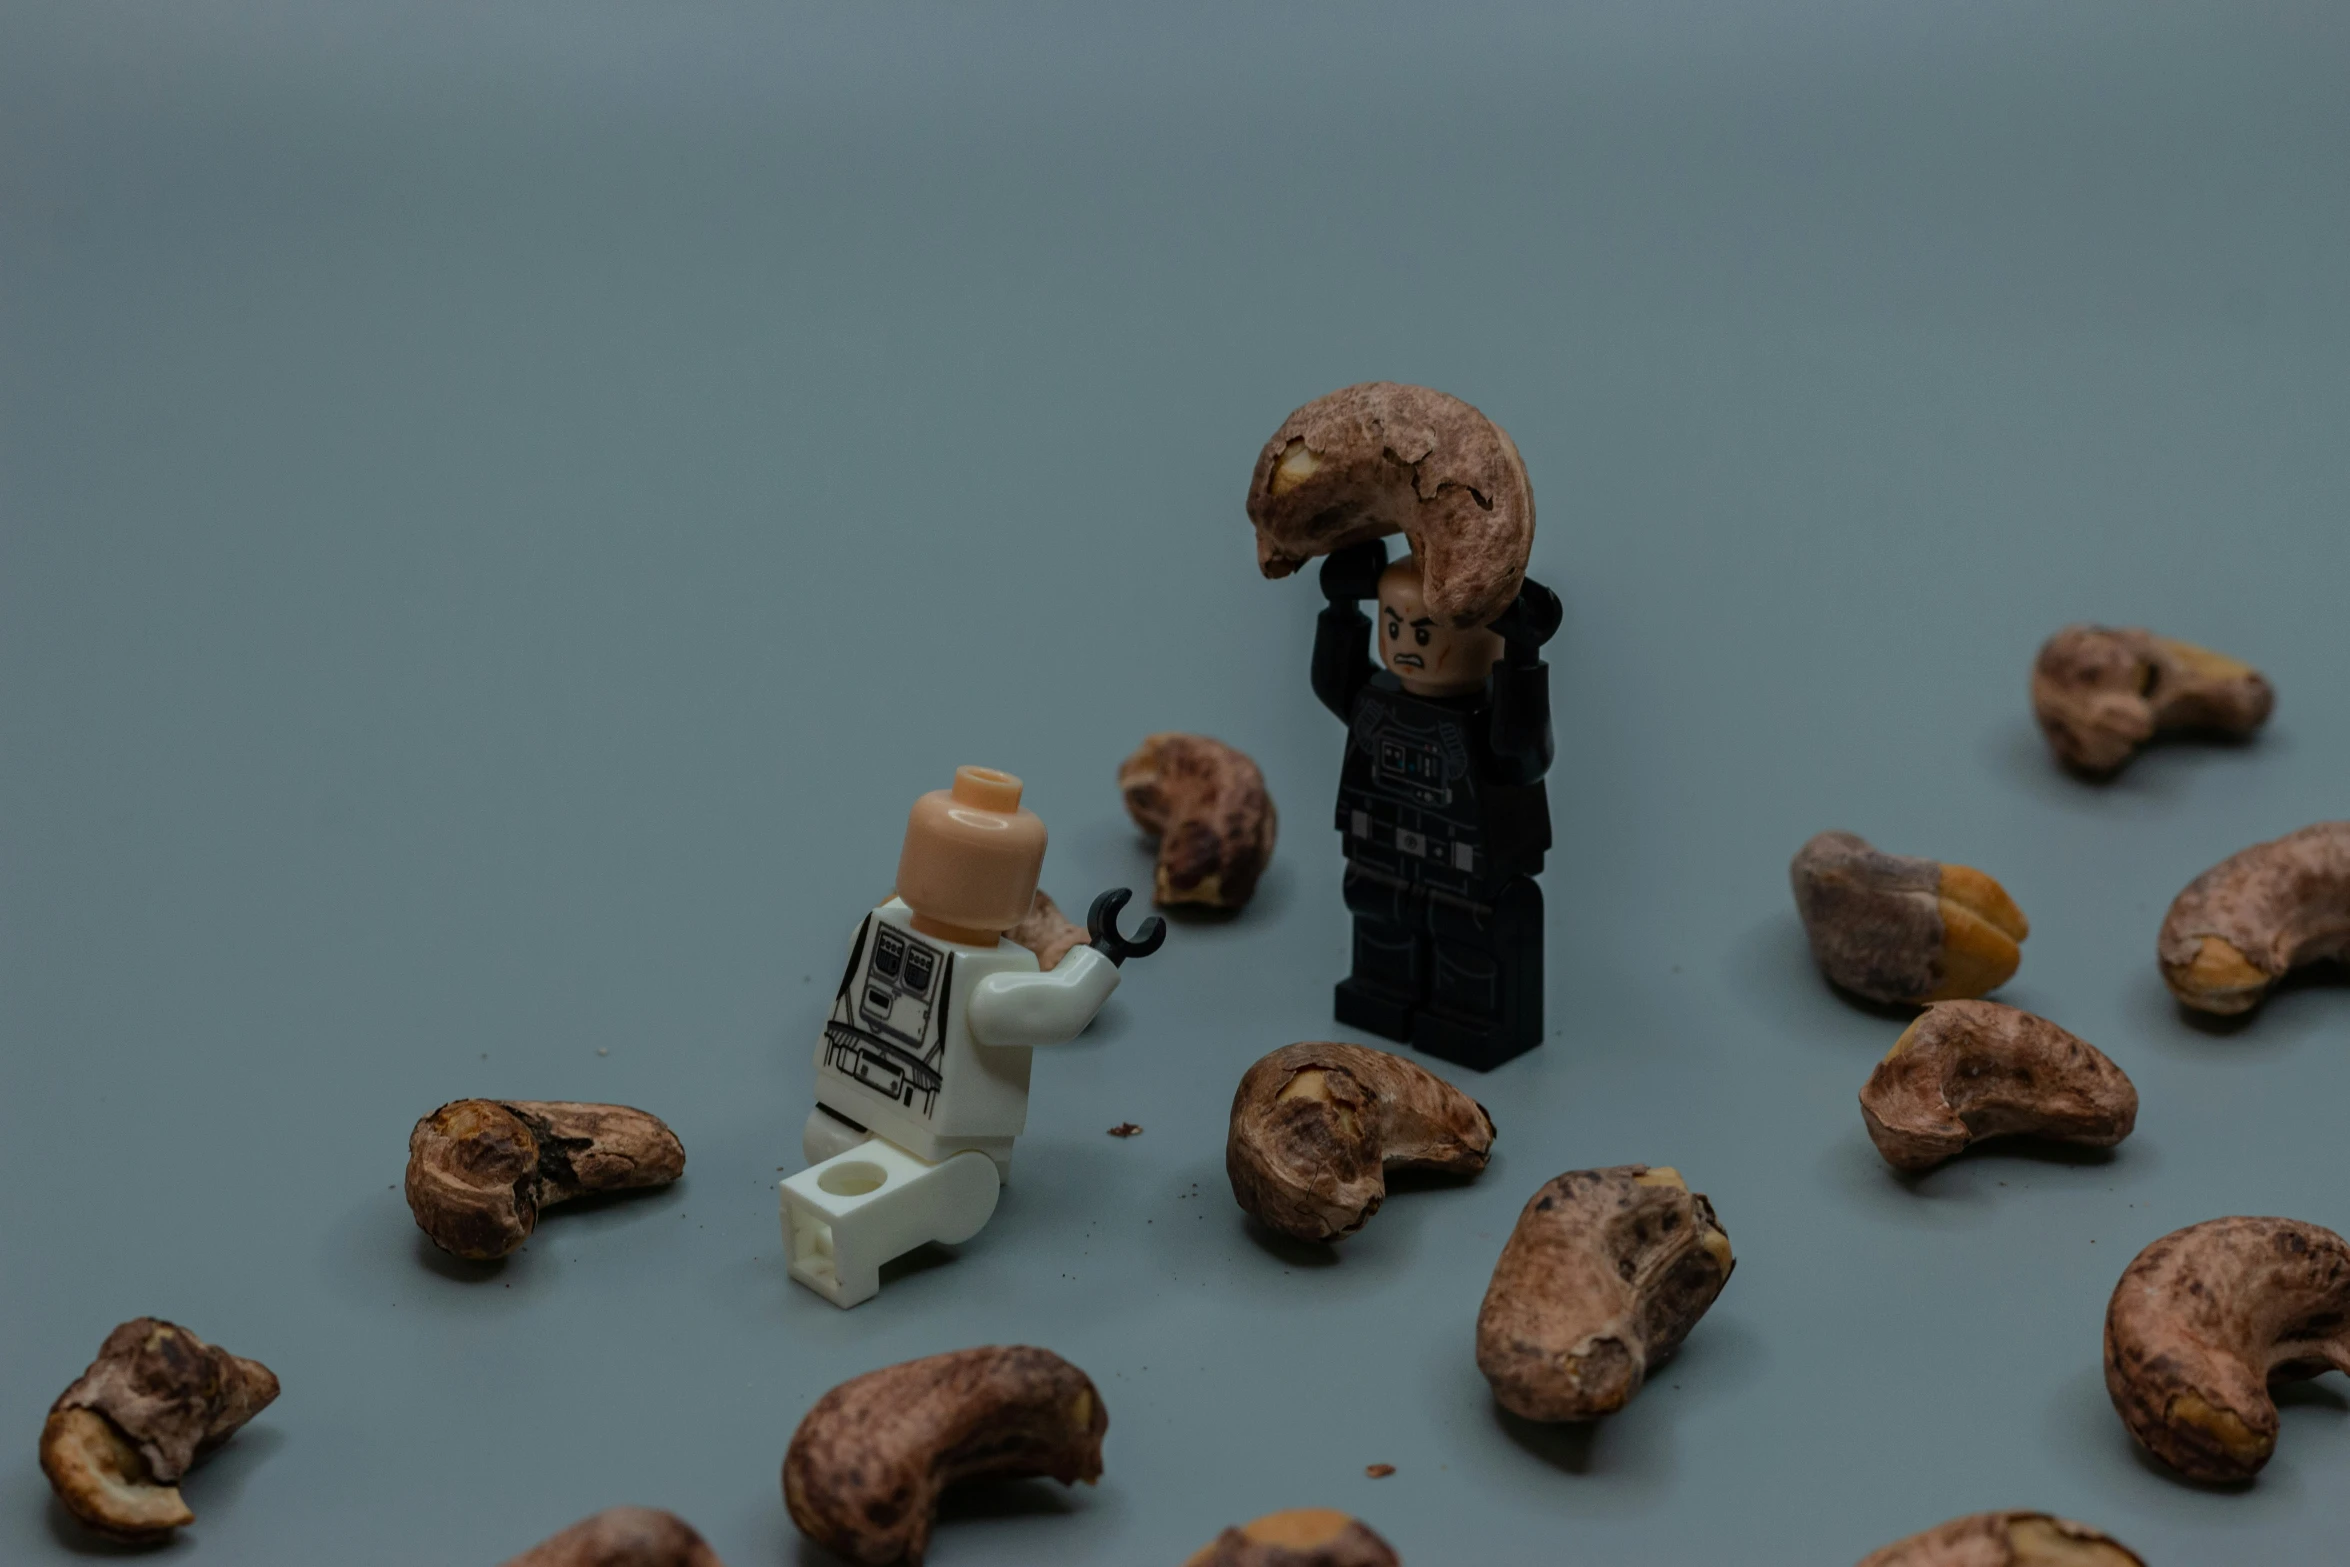 a lego figurine holding an umbrella amongst some chocolate chips